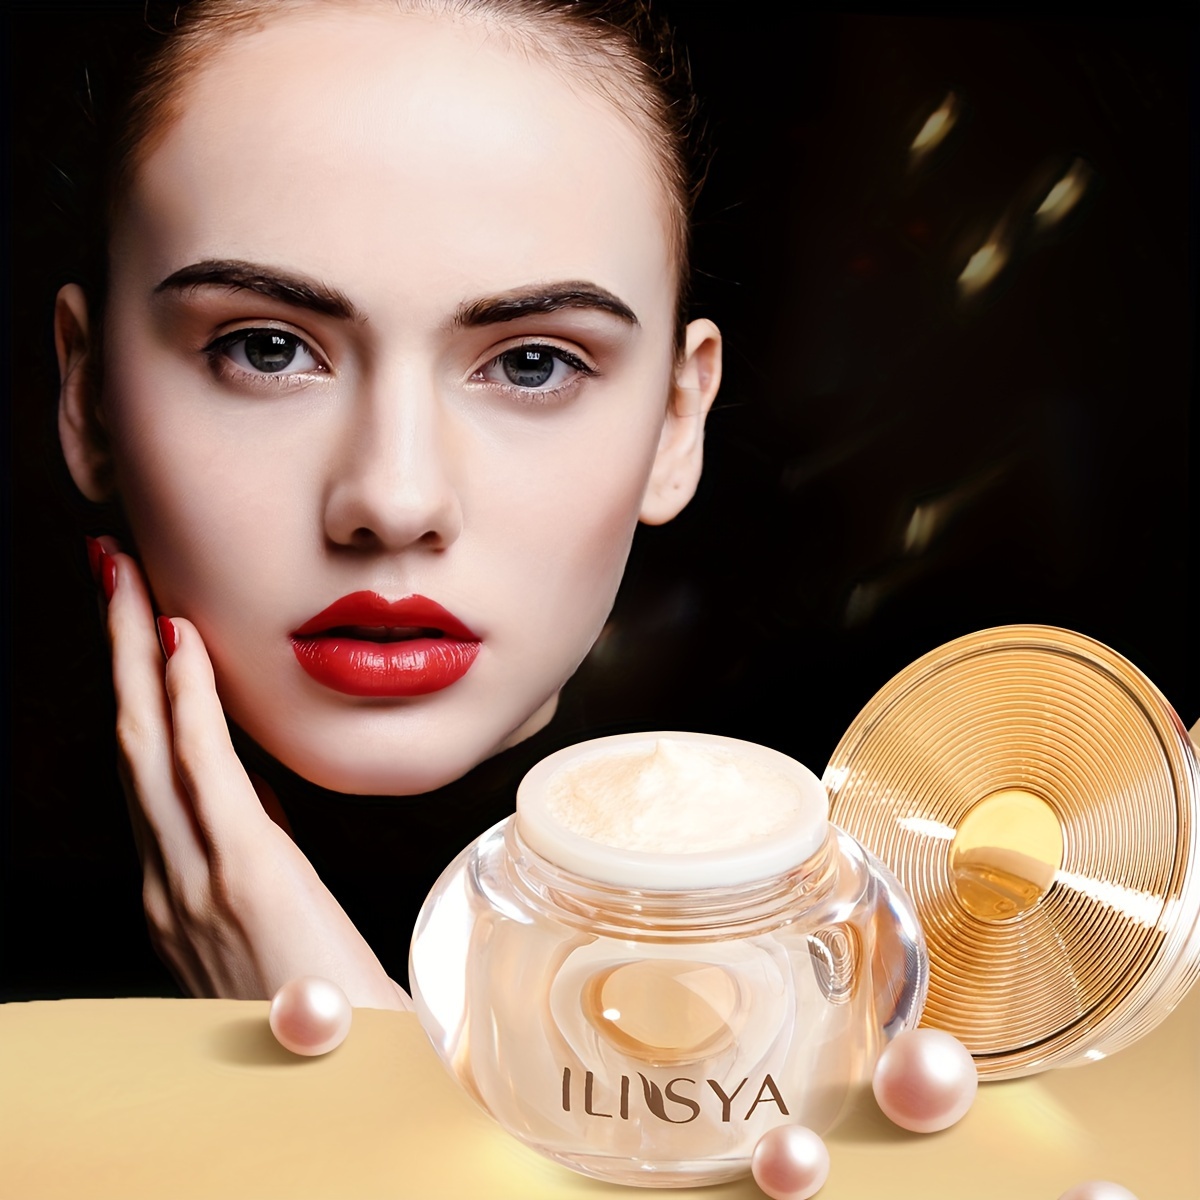 

Ilisya Luxury Face Cream - 50g, Unisex, Hypoallergenic With Rosehip & Centella Asiatica, Deep Hydration For All Skin Types, Revitalizes Youthful Glow